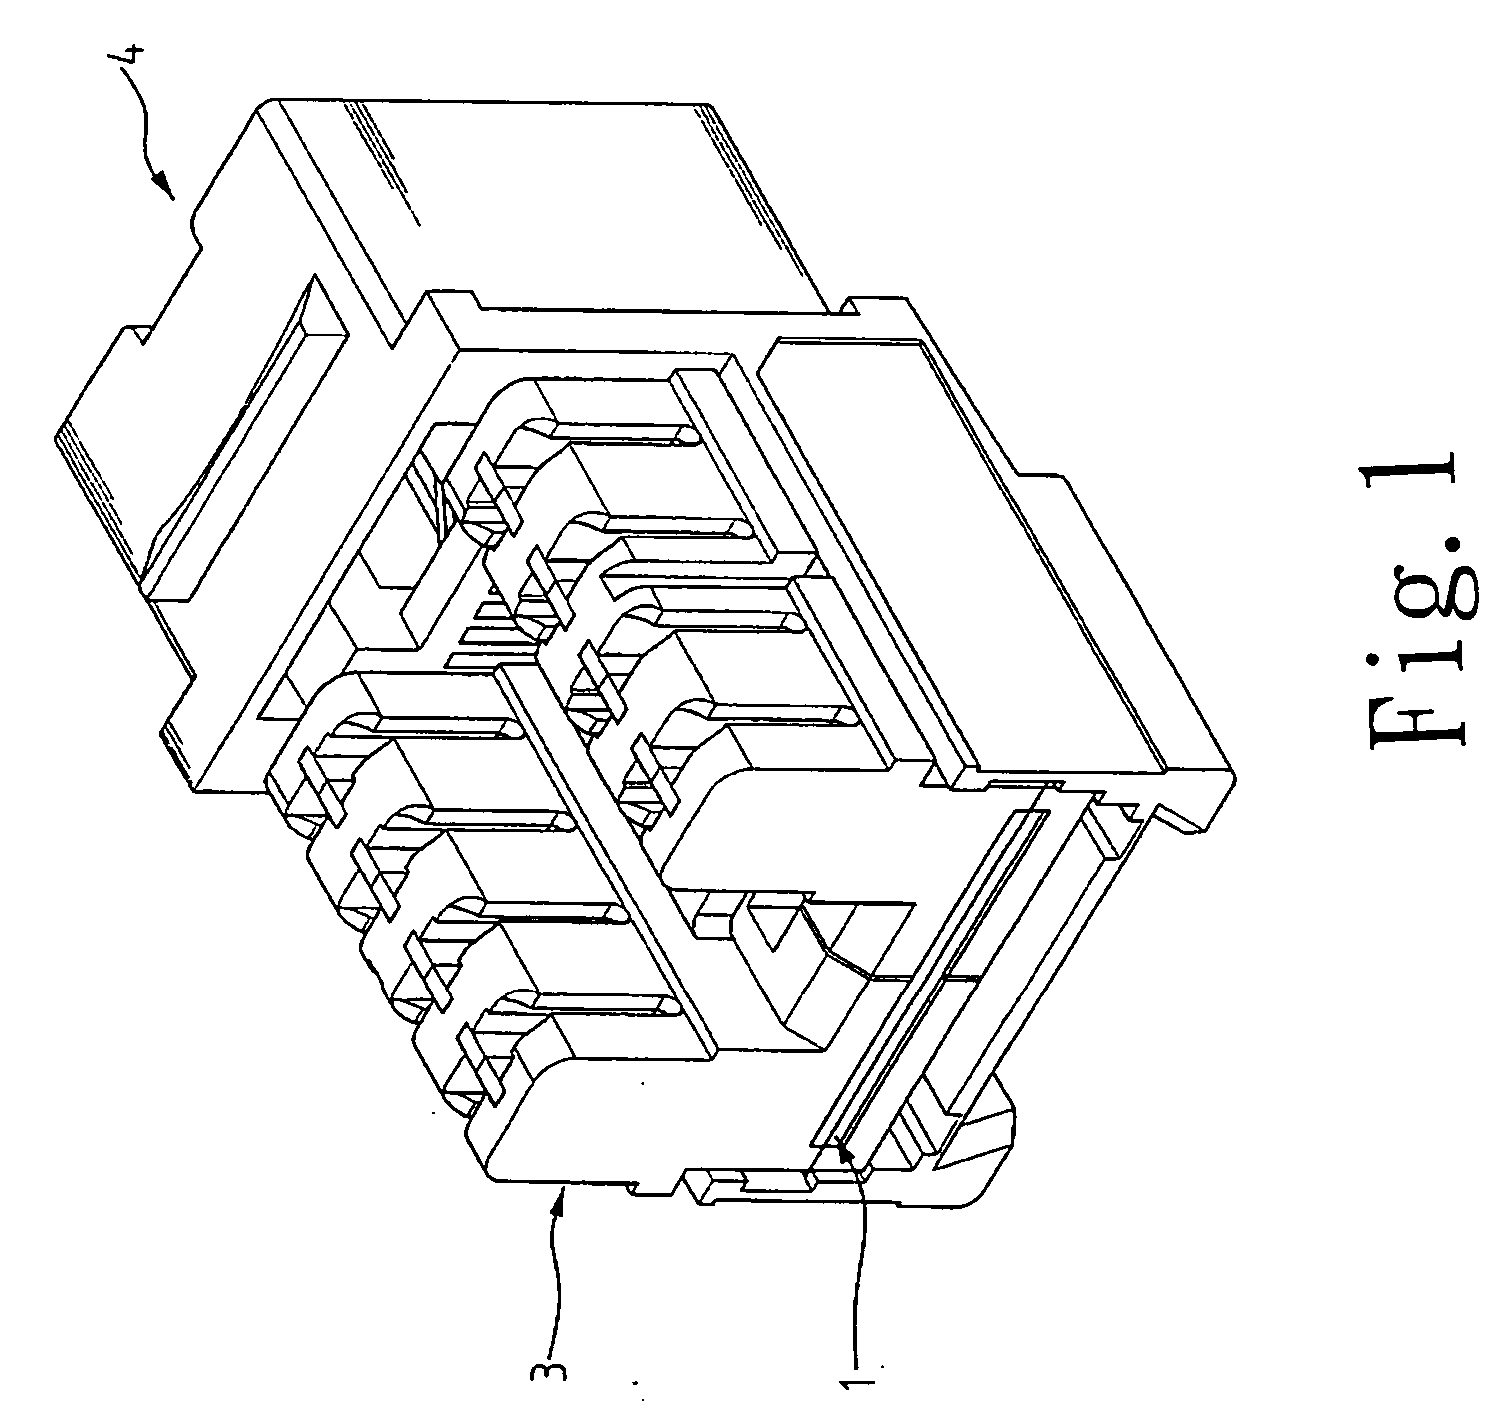 Assembled structure of a connector